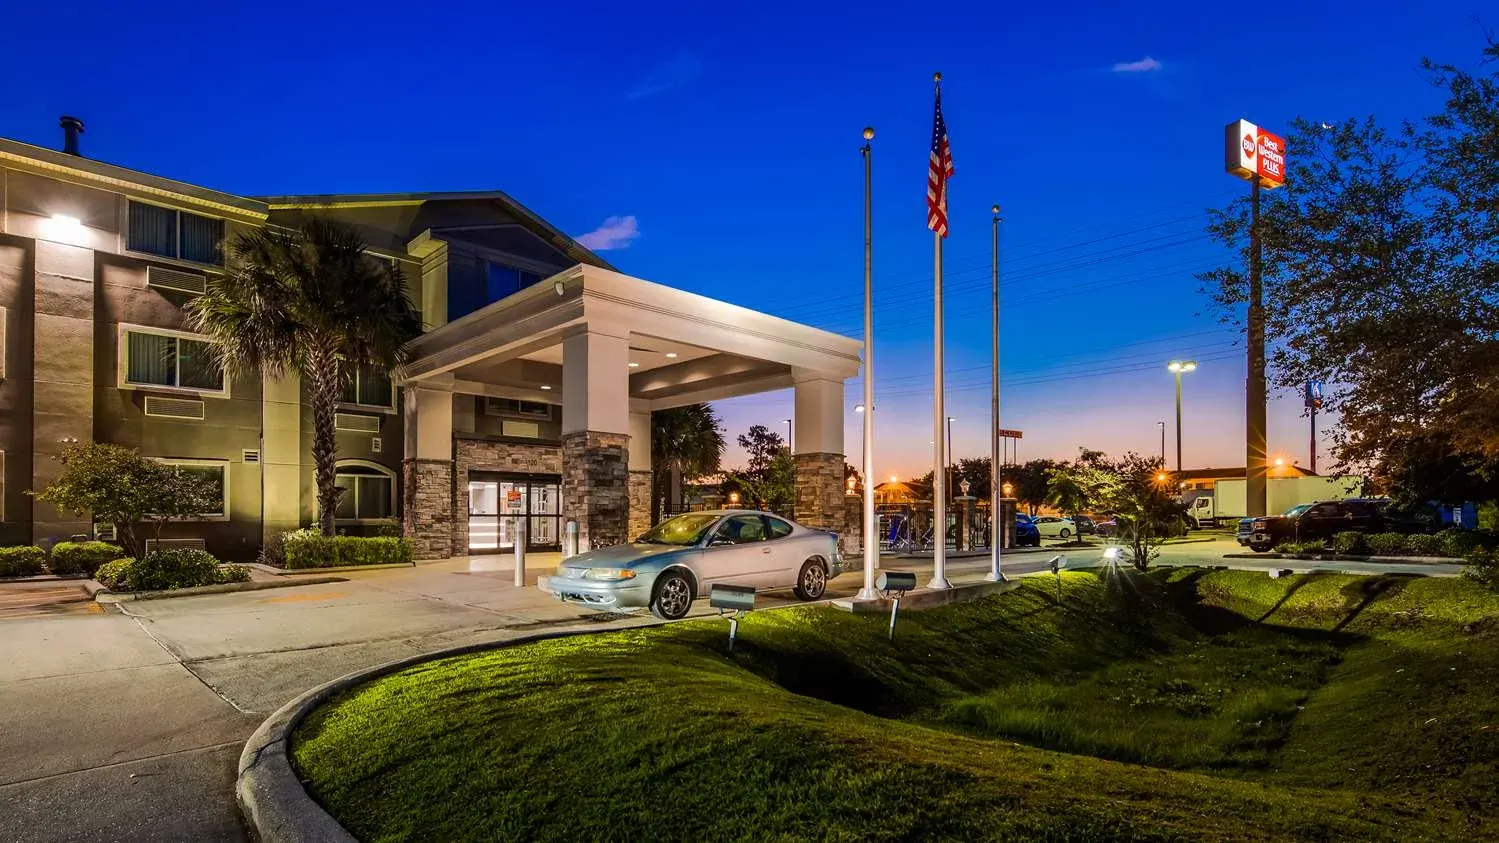 Top Hotels in Slidell